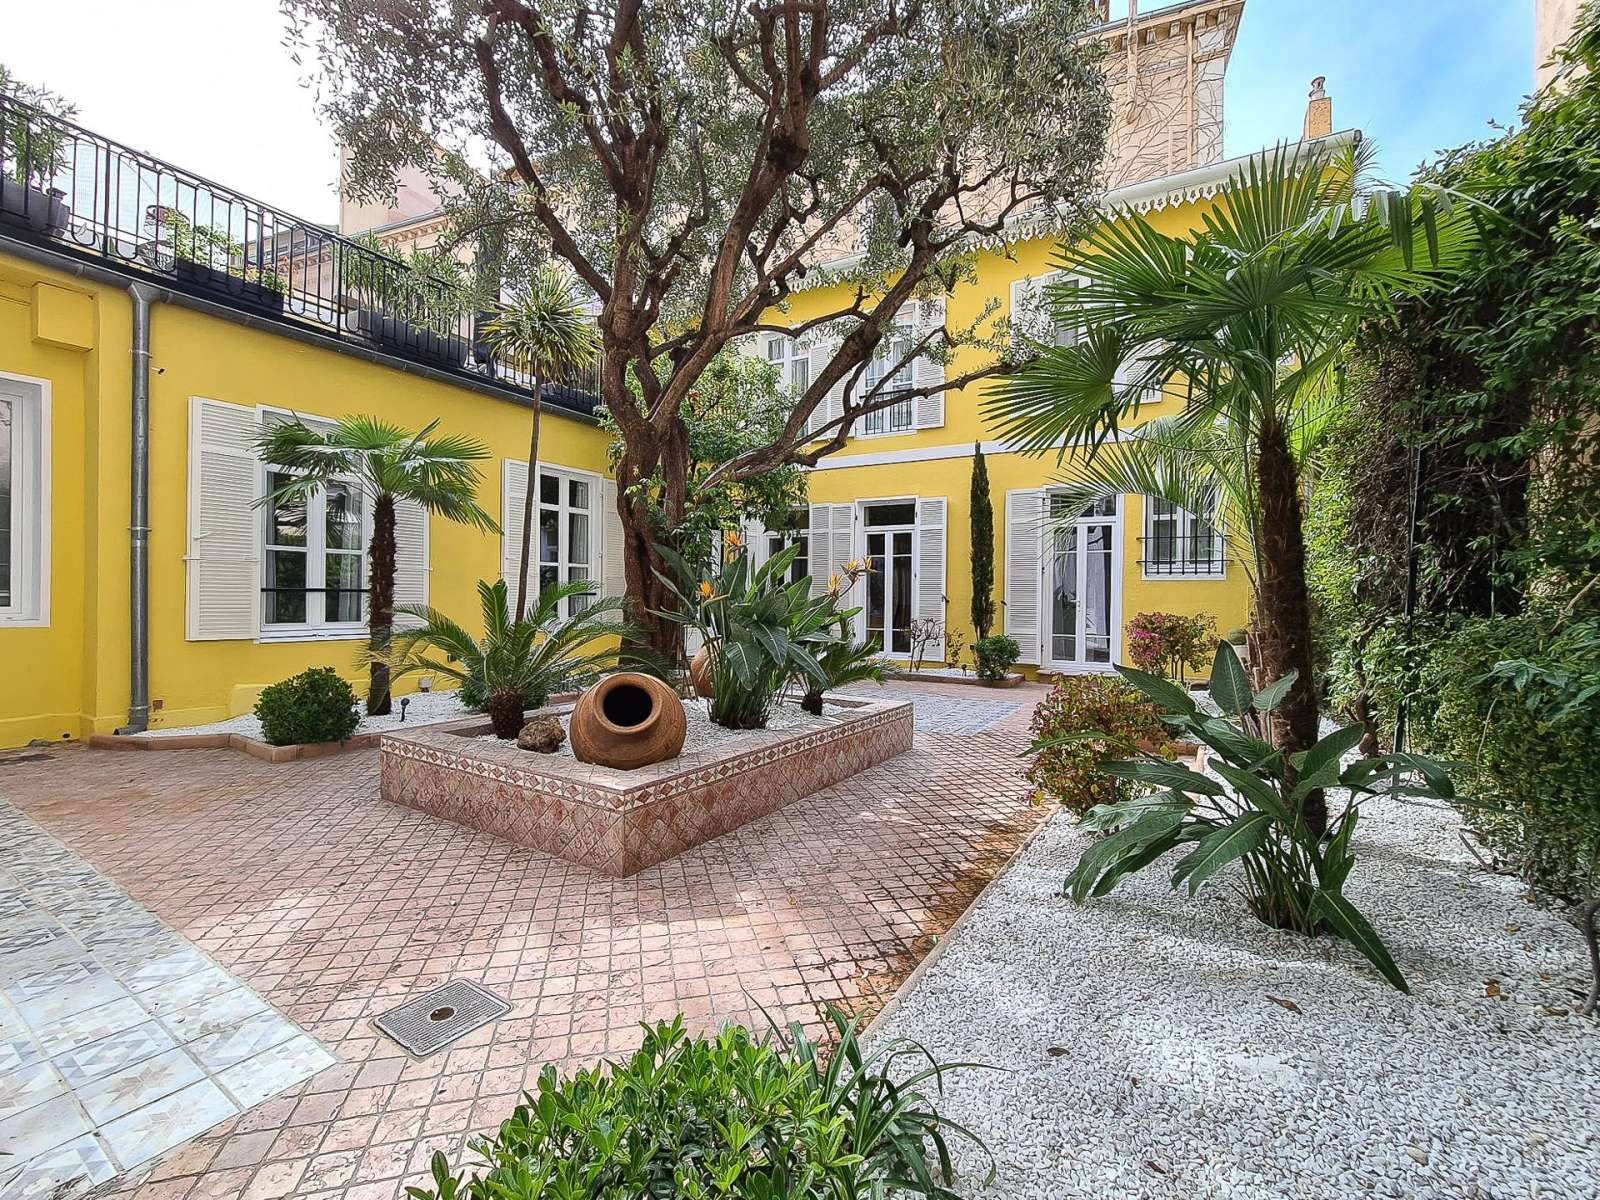 Villa in Cannes few minutes from Croisette and Palais des Festivals